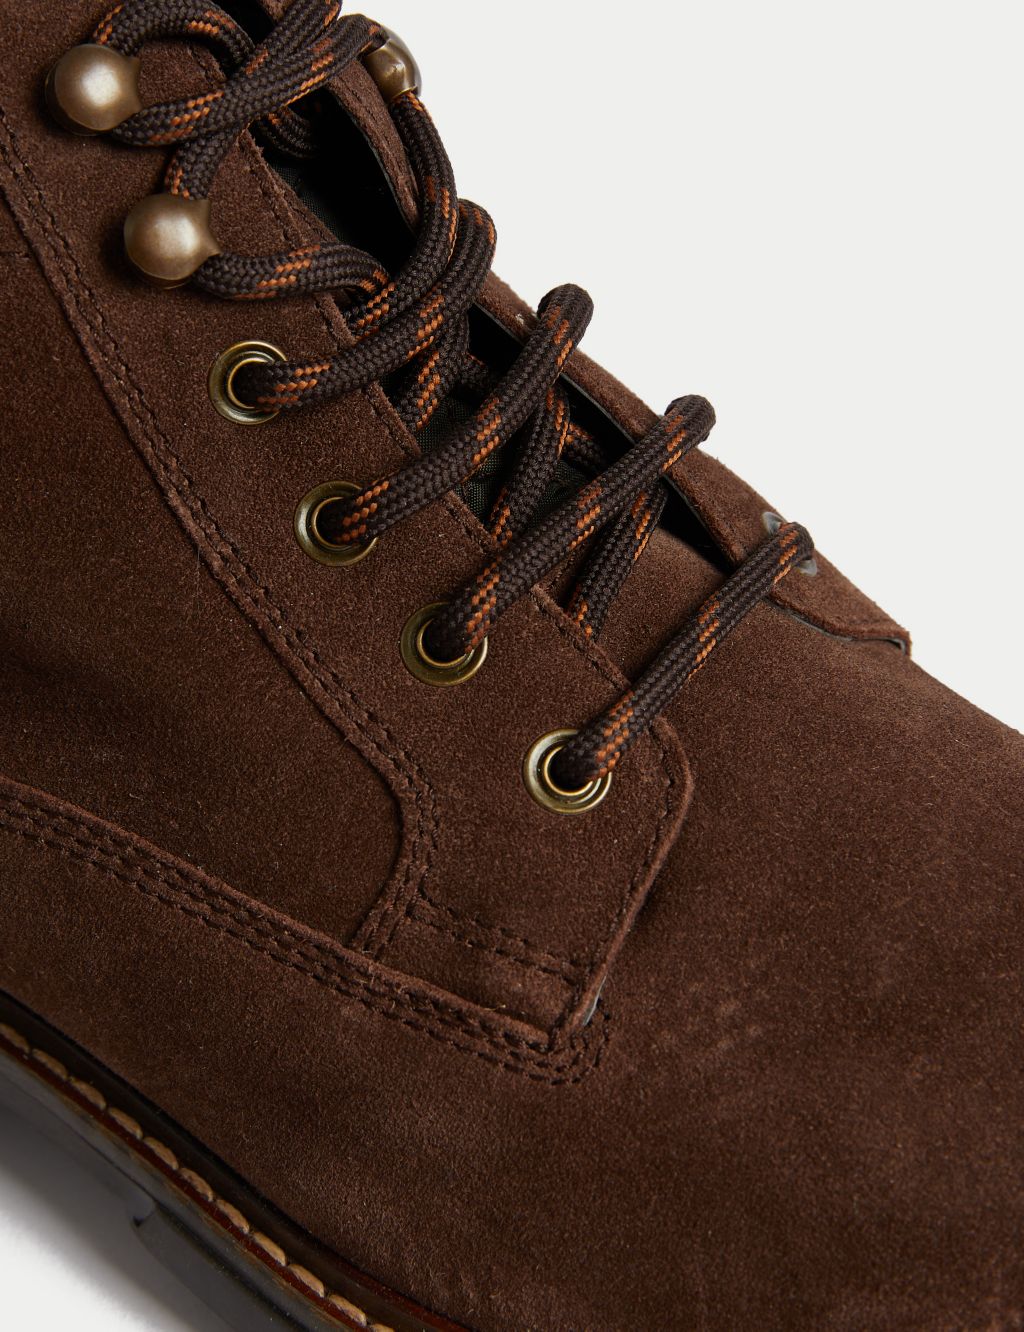 Suede Casual Boots image 3